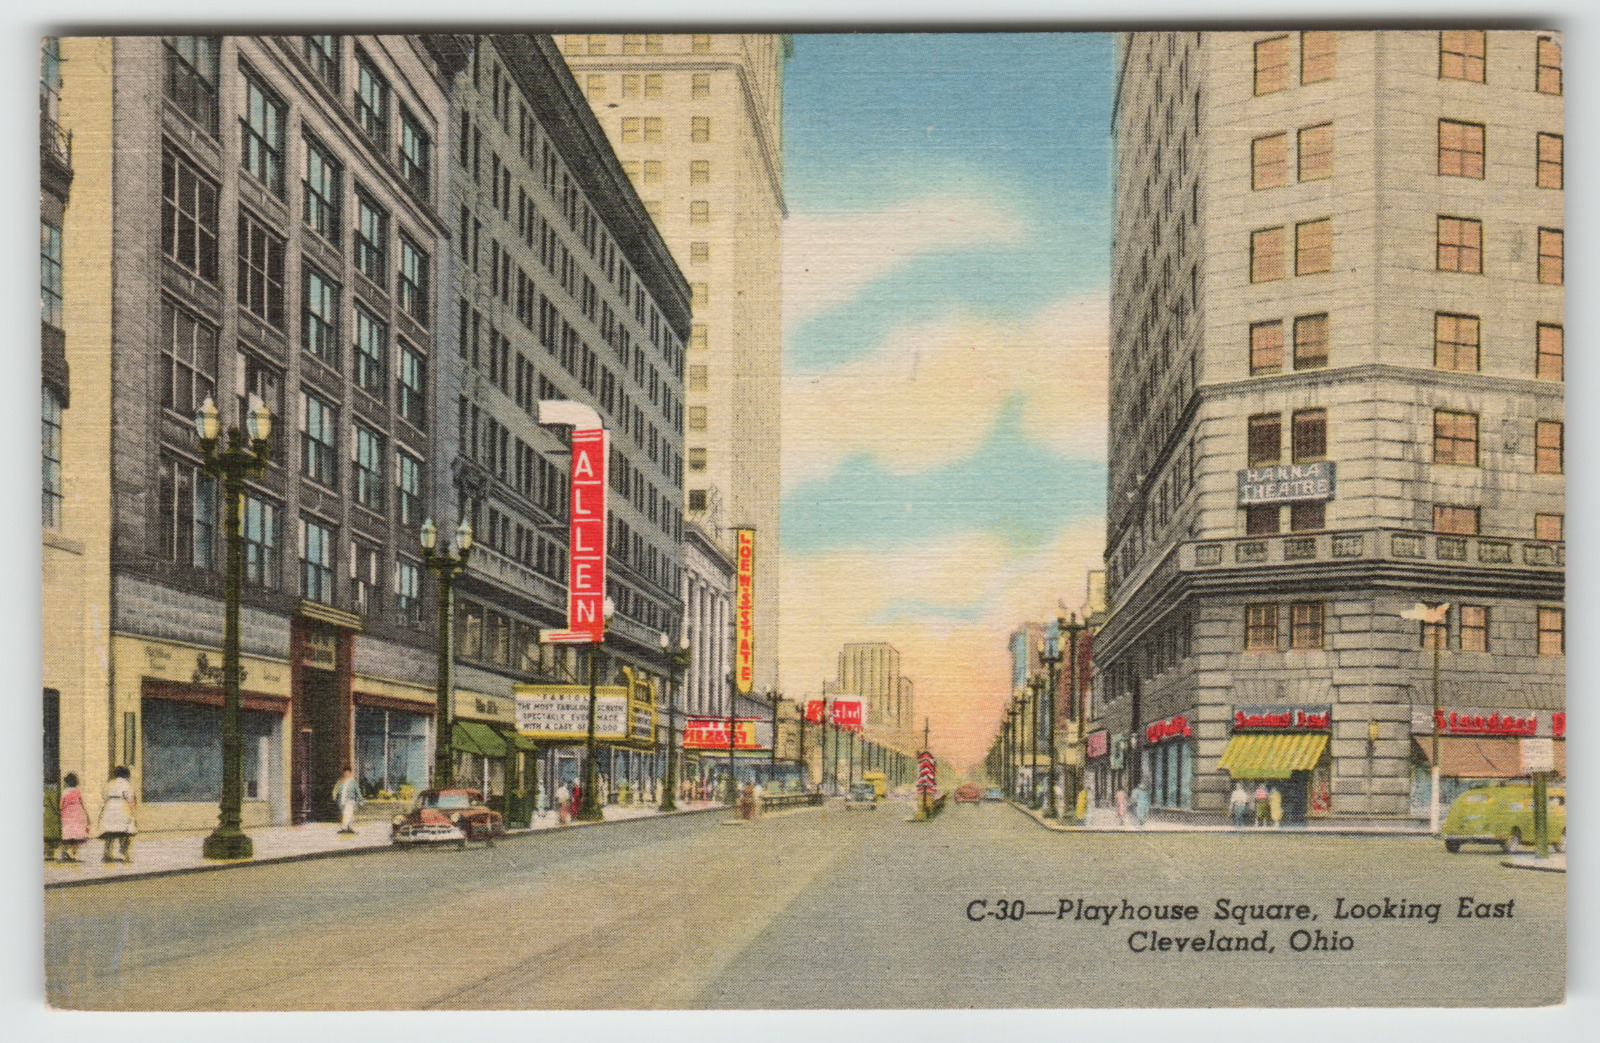 Postcard Linen Playhouse Square Looking East Cleveland, OH